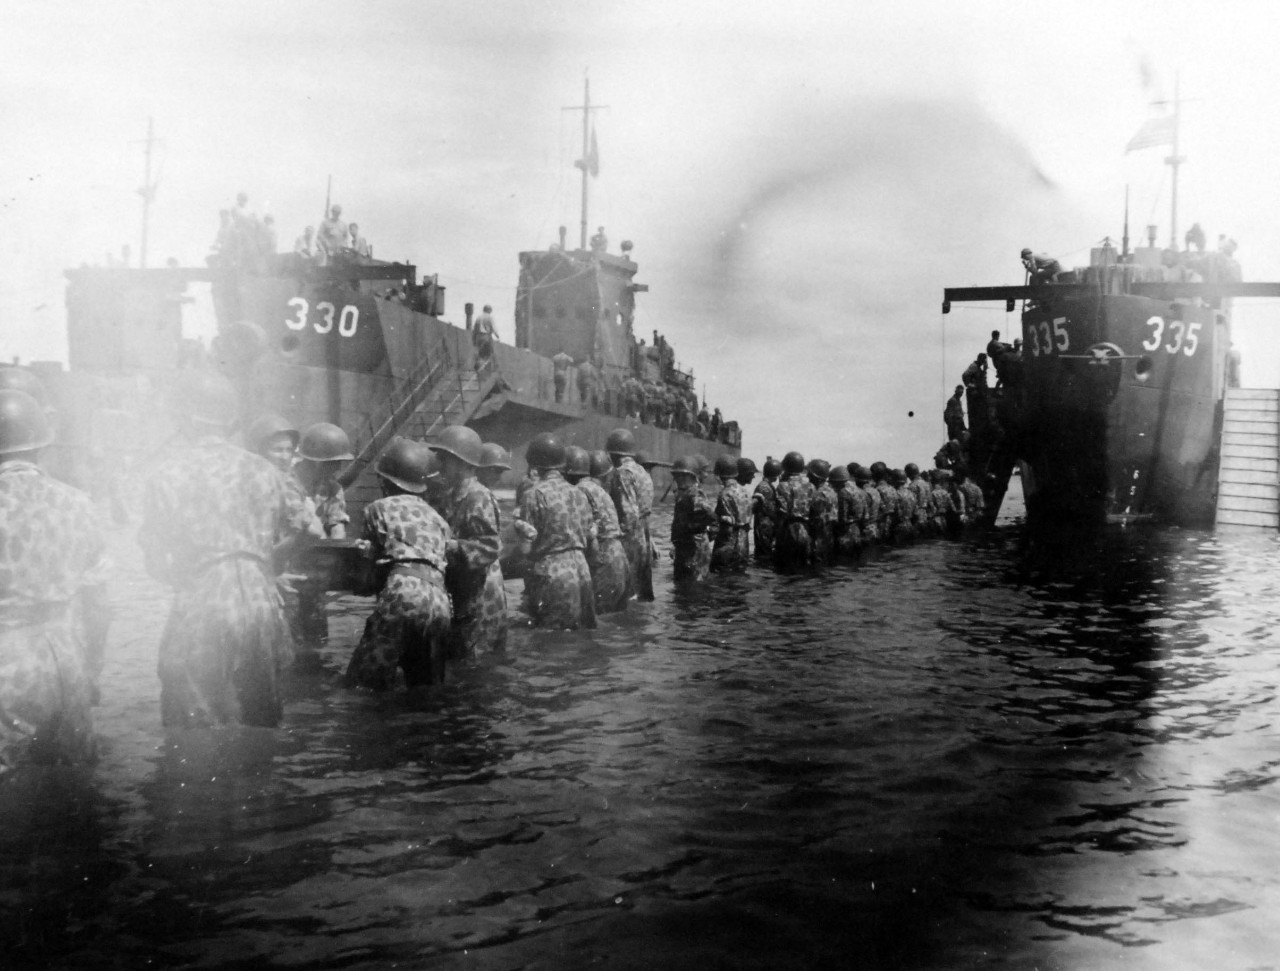 80-G-52697:   Rendova Island Invasion, June 30, 1943. Troops during the invasion aboard Landing Craft Infantry (Large),  LCI(L) 330 and LCI(L) 335 . Official U.S. Navy Photograph, now in the collections of the National Archives.  (2018/04/04).  